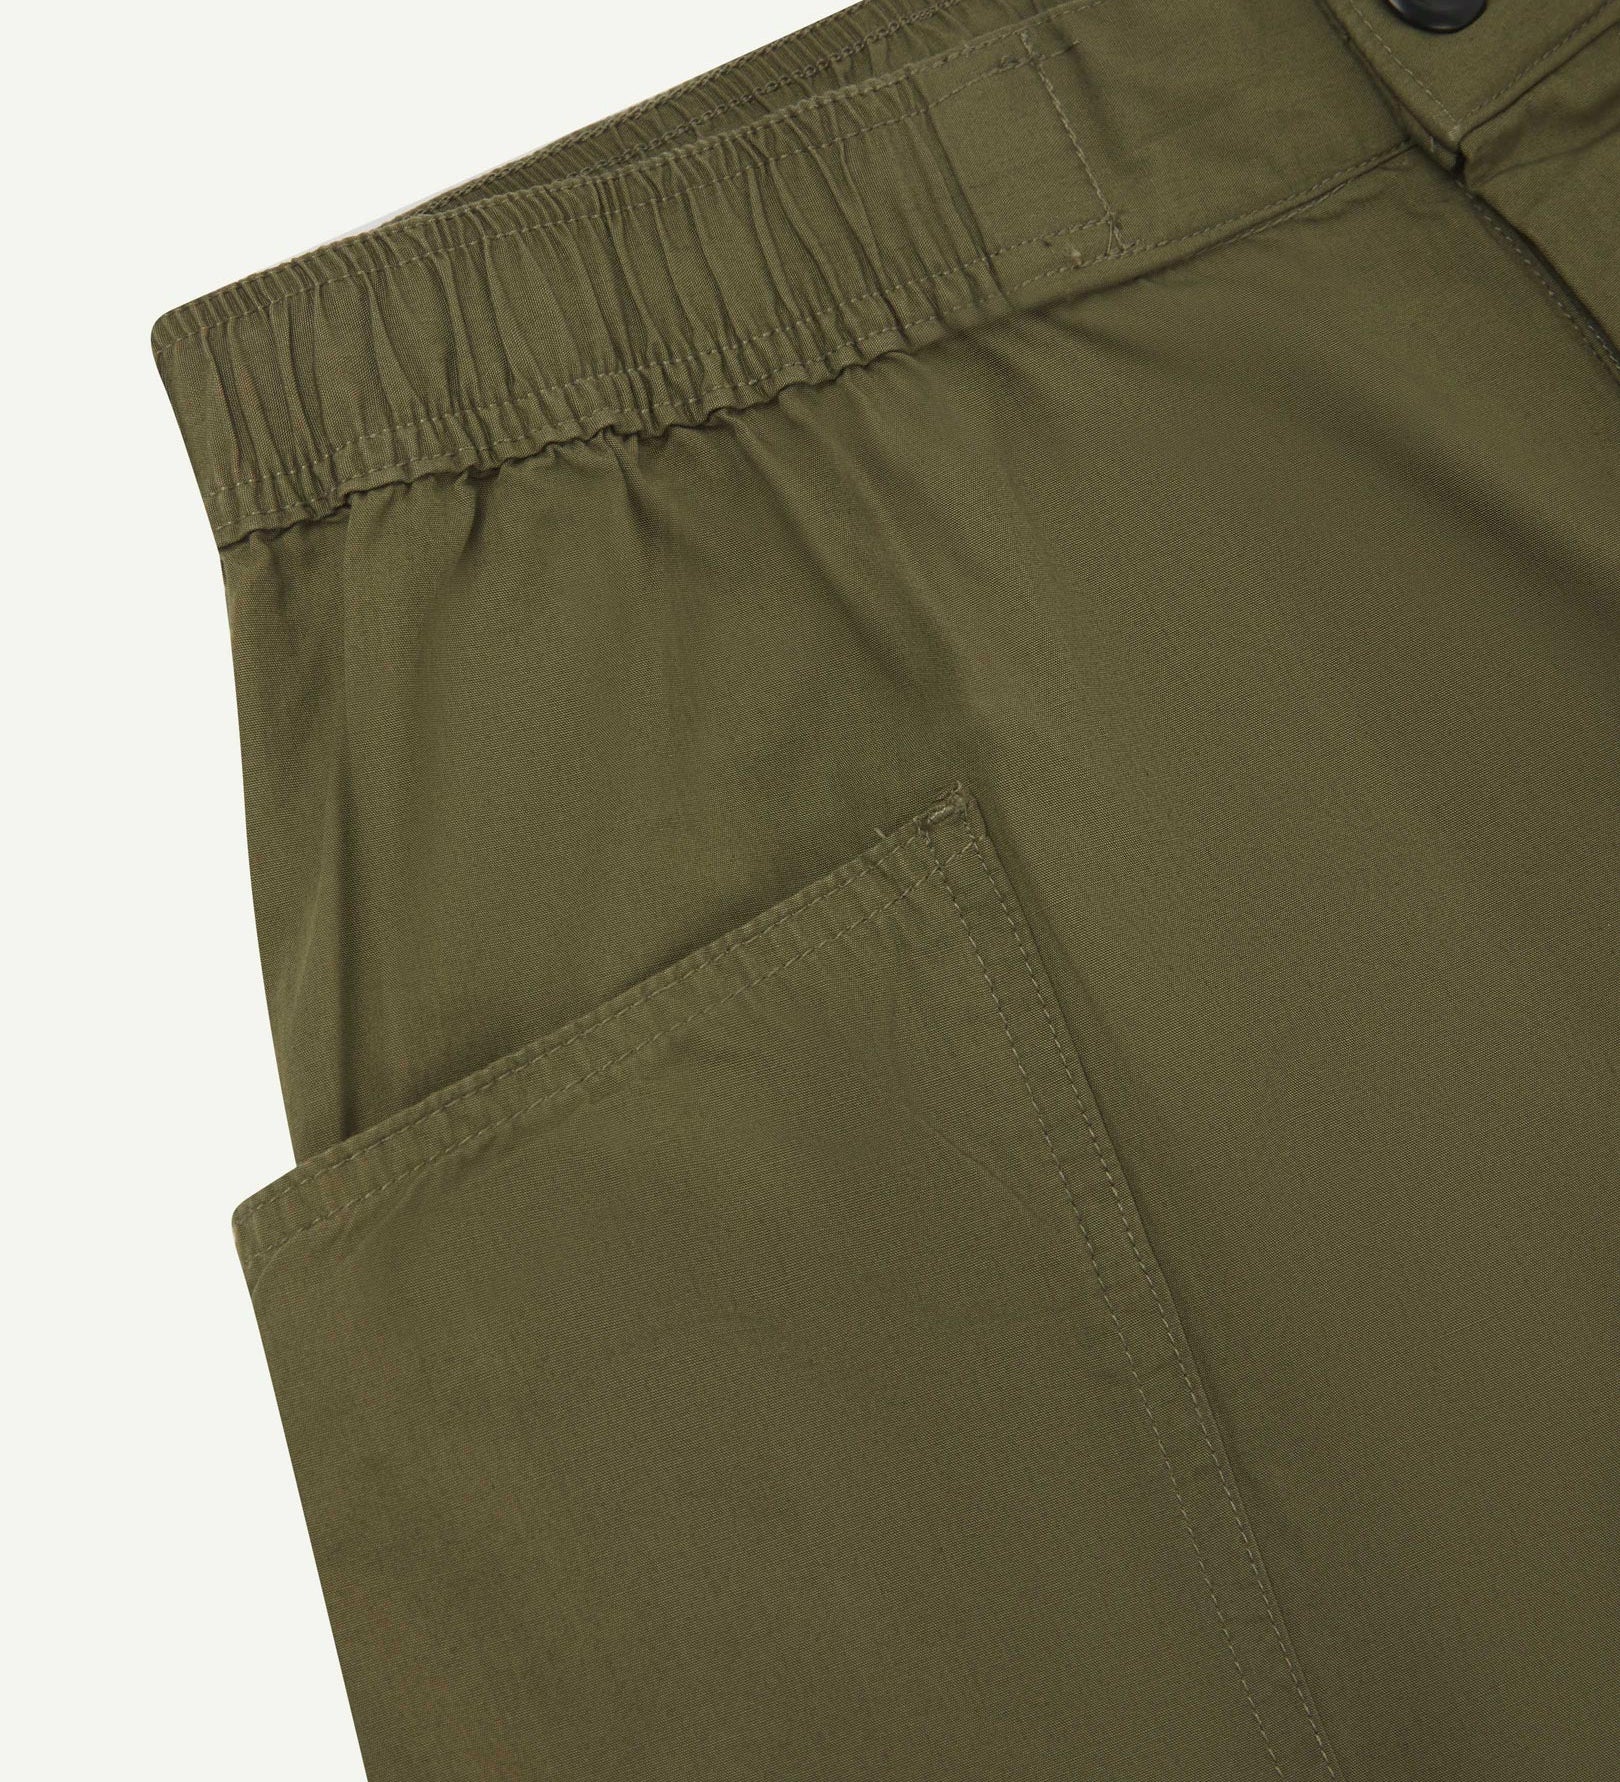 Close-up of the left pocket and stitching of the lightweight organic olive-green-green cotton shorts.